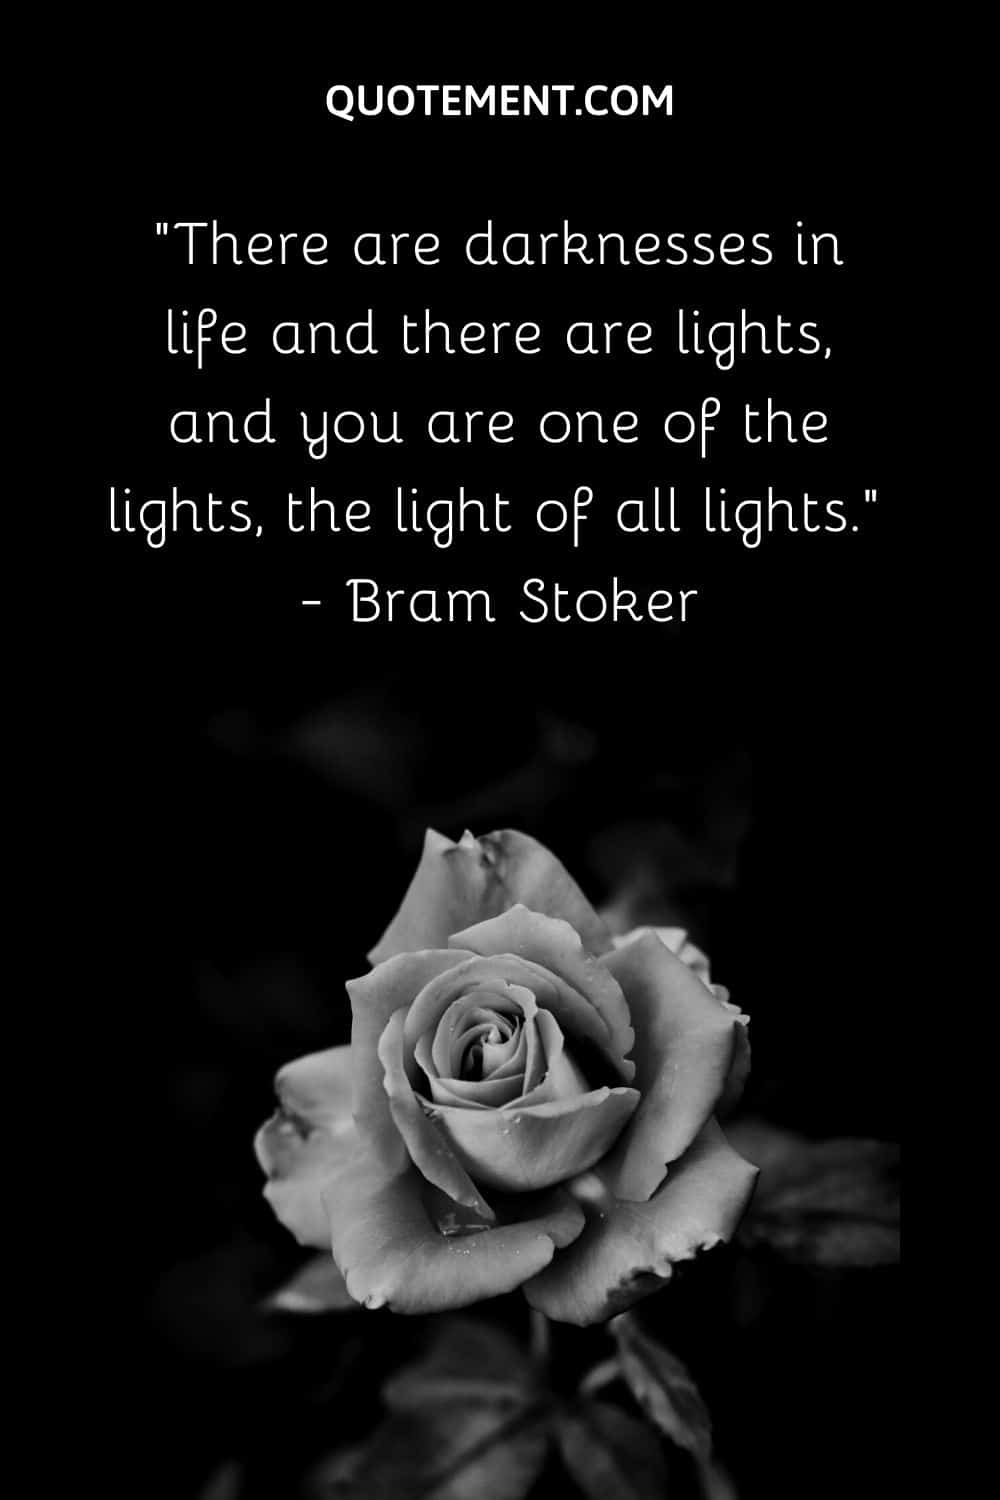 There are darknesses in life and there are lights, and you are one of the lights, the light of all lights.